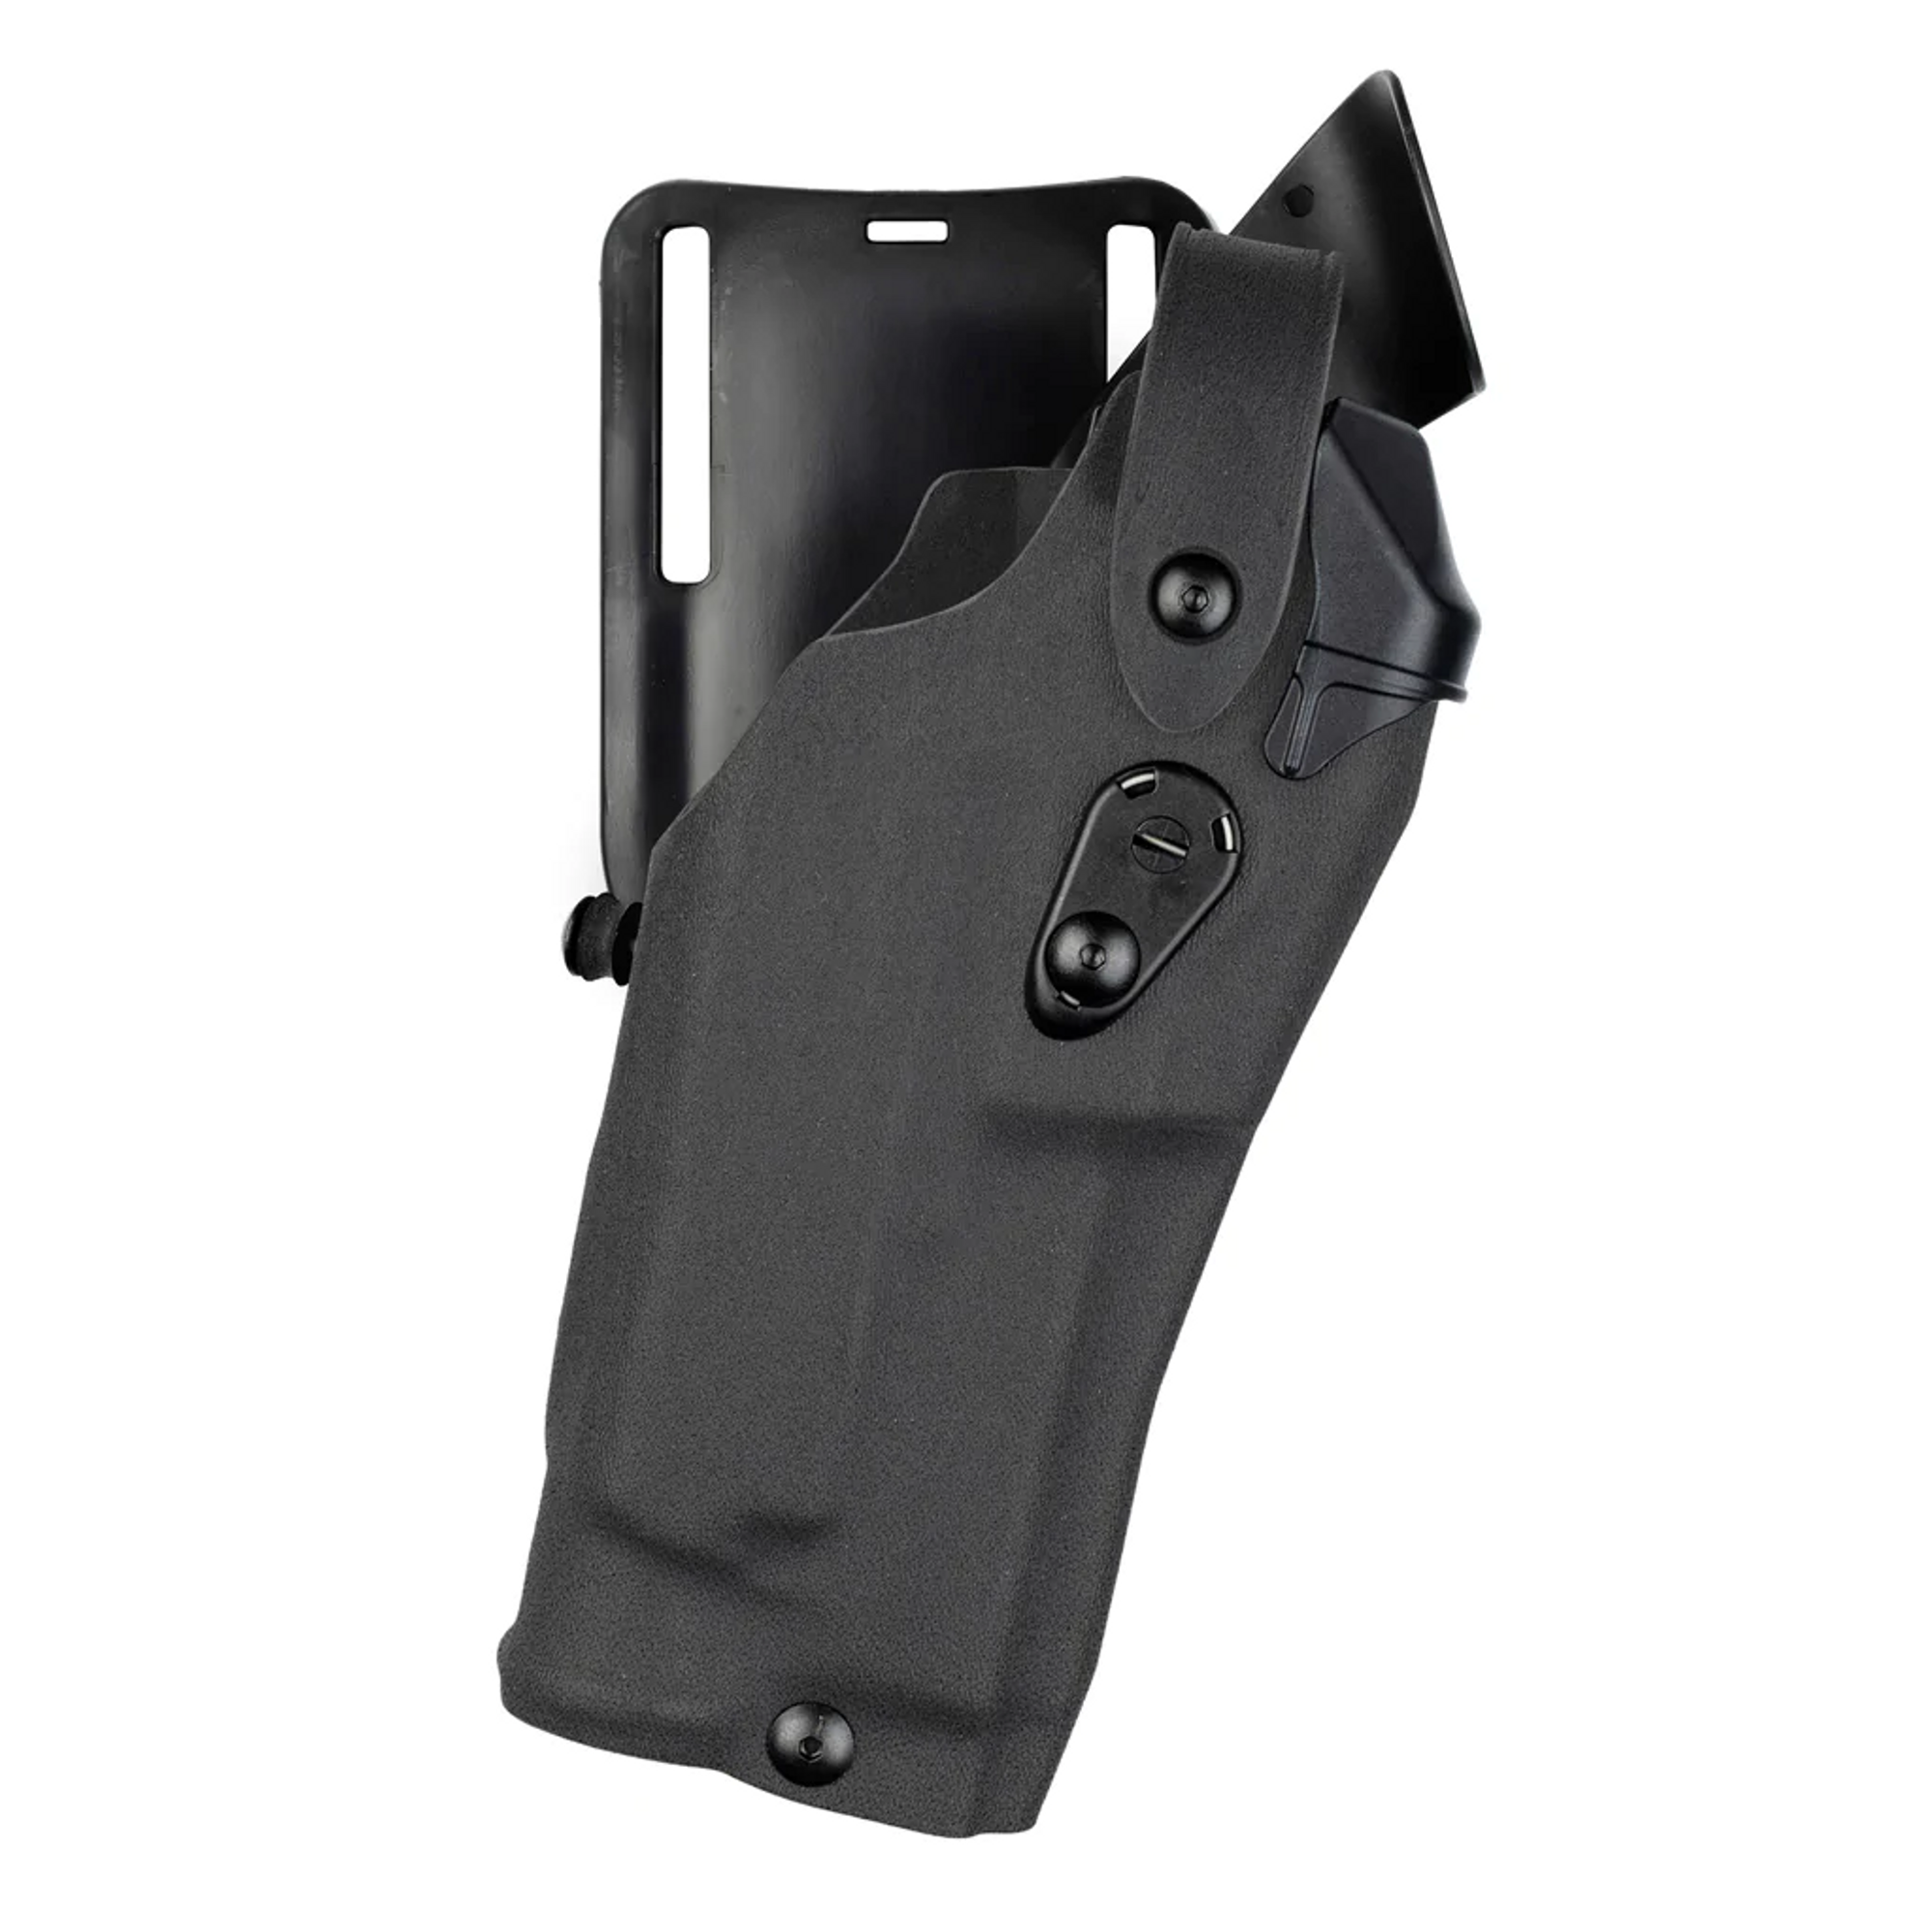 Model 6365rds Als/sls Low-ride, Level Iii Retention Duty Holster For Glock 17 Mos W/ Light - KR6365RDS-832-131